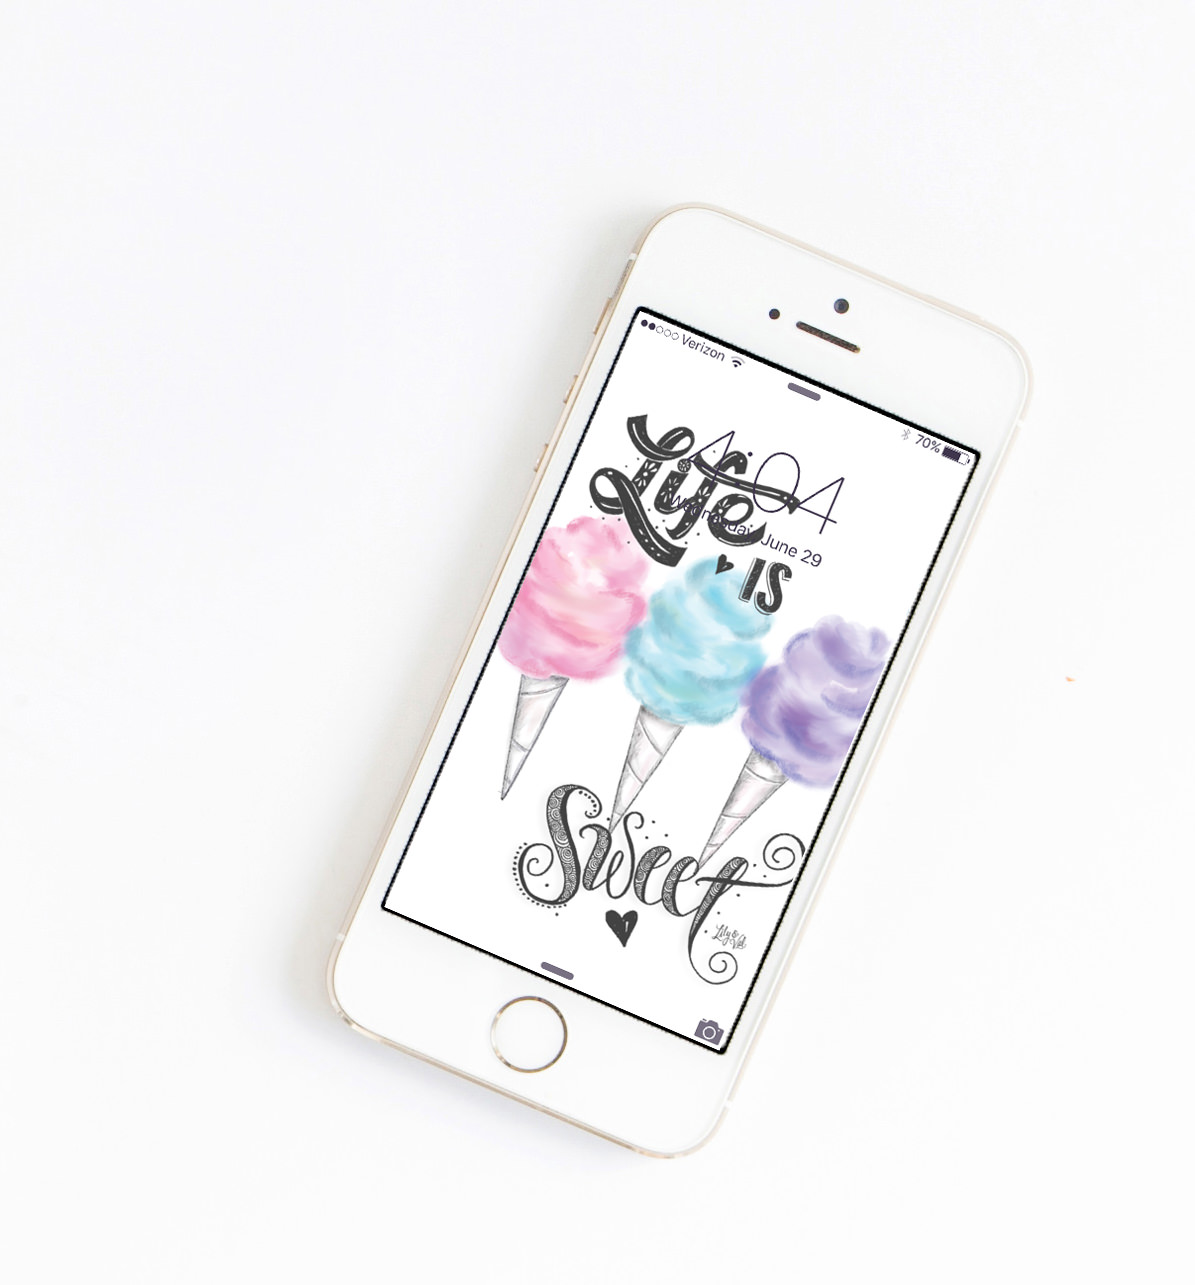 Dress your tech with something sweet! Free iPhone wallpaper via Lily & Val Living!